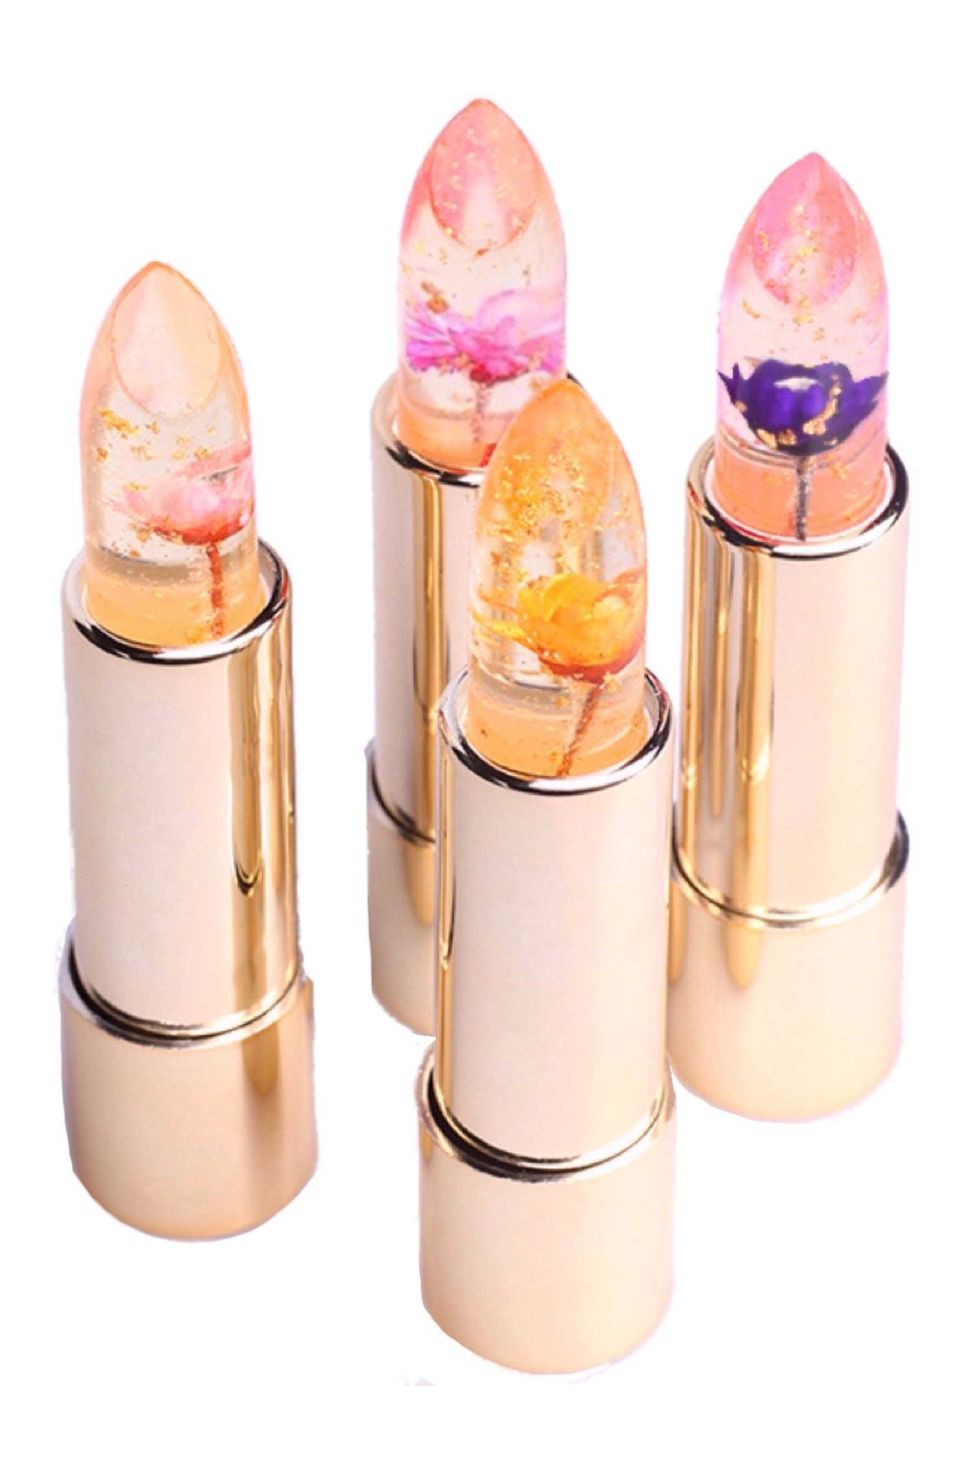 <p><a href="http://www.cosmopolitan.co.uk/beauty-hair/makeup/news/a44194/viral-jelly-flower-lipsticks/" target="_blank" data-tracking-id="recirc-text-link">These lipsticks</a> are everything you've ever wanted in a beauty product. Not only are they clear and jelly-infused, but also they contain gold specks and tiny flowers. The internet lined up to buy these literally just to look at them. </p>